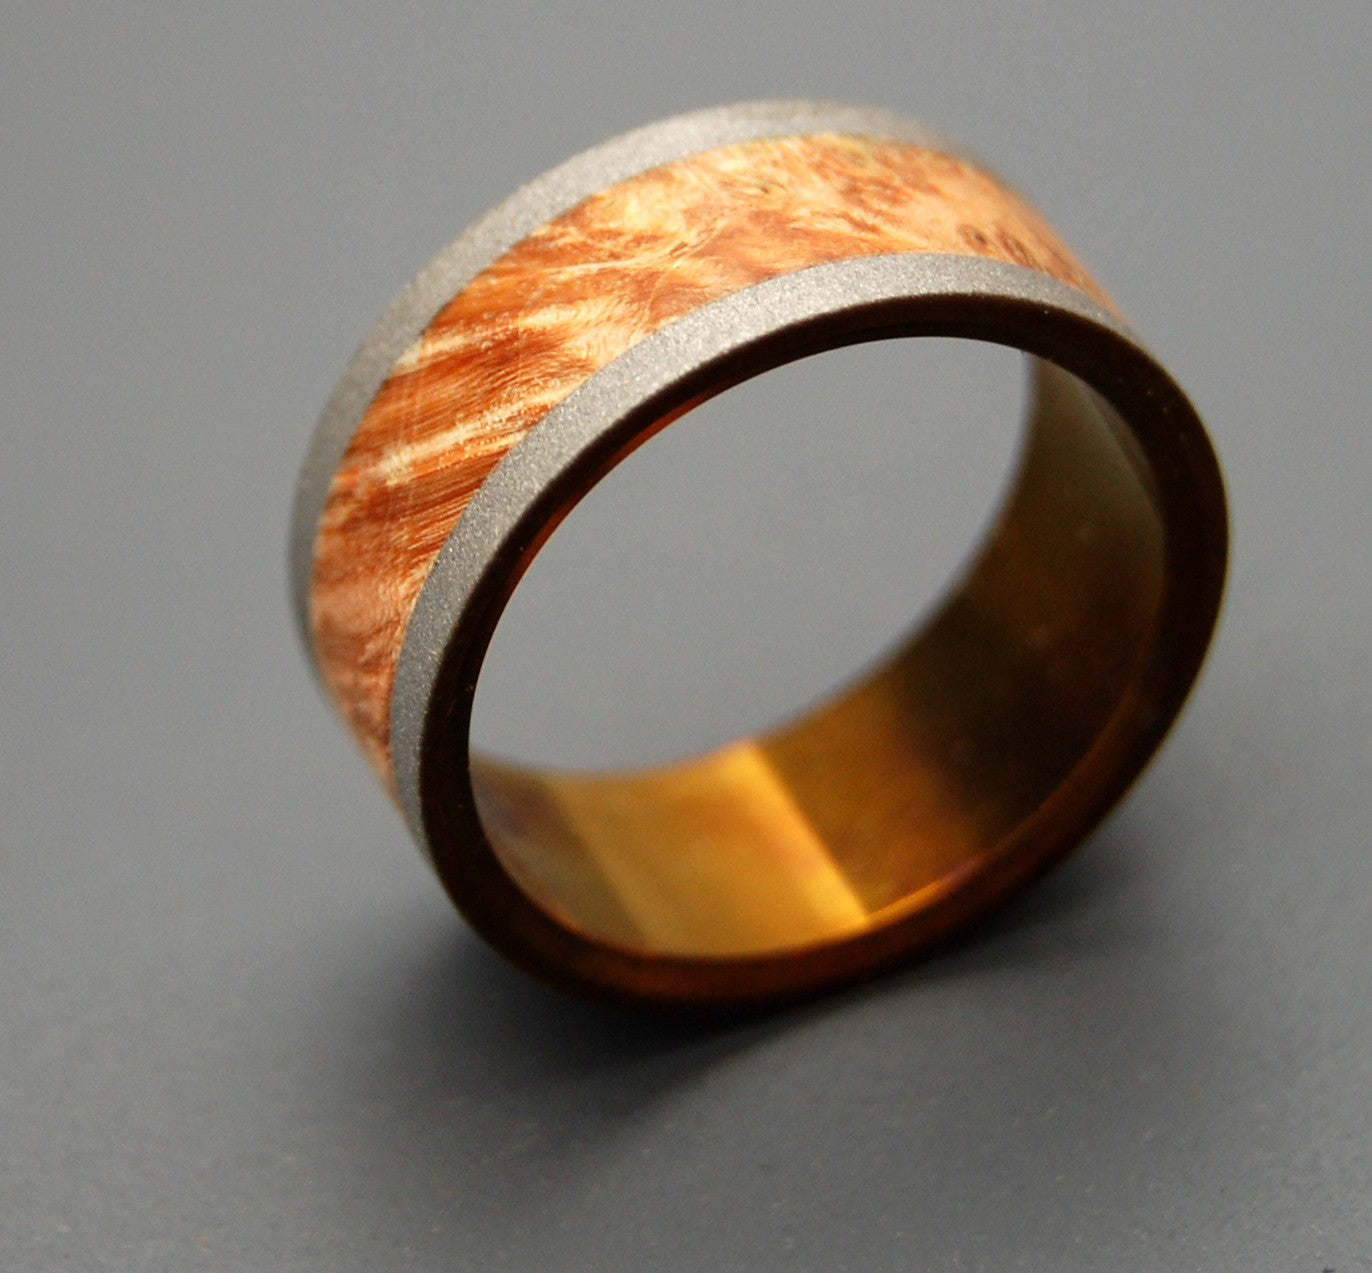 Ring Of Fire | Wood and Hand Anodized Bronze - Titanium Wedding Ring - Minter and Richter Designs